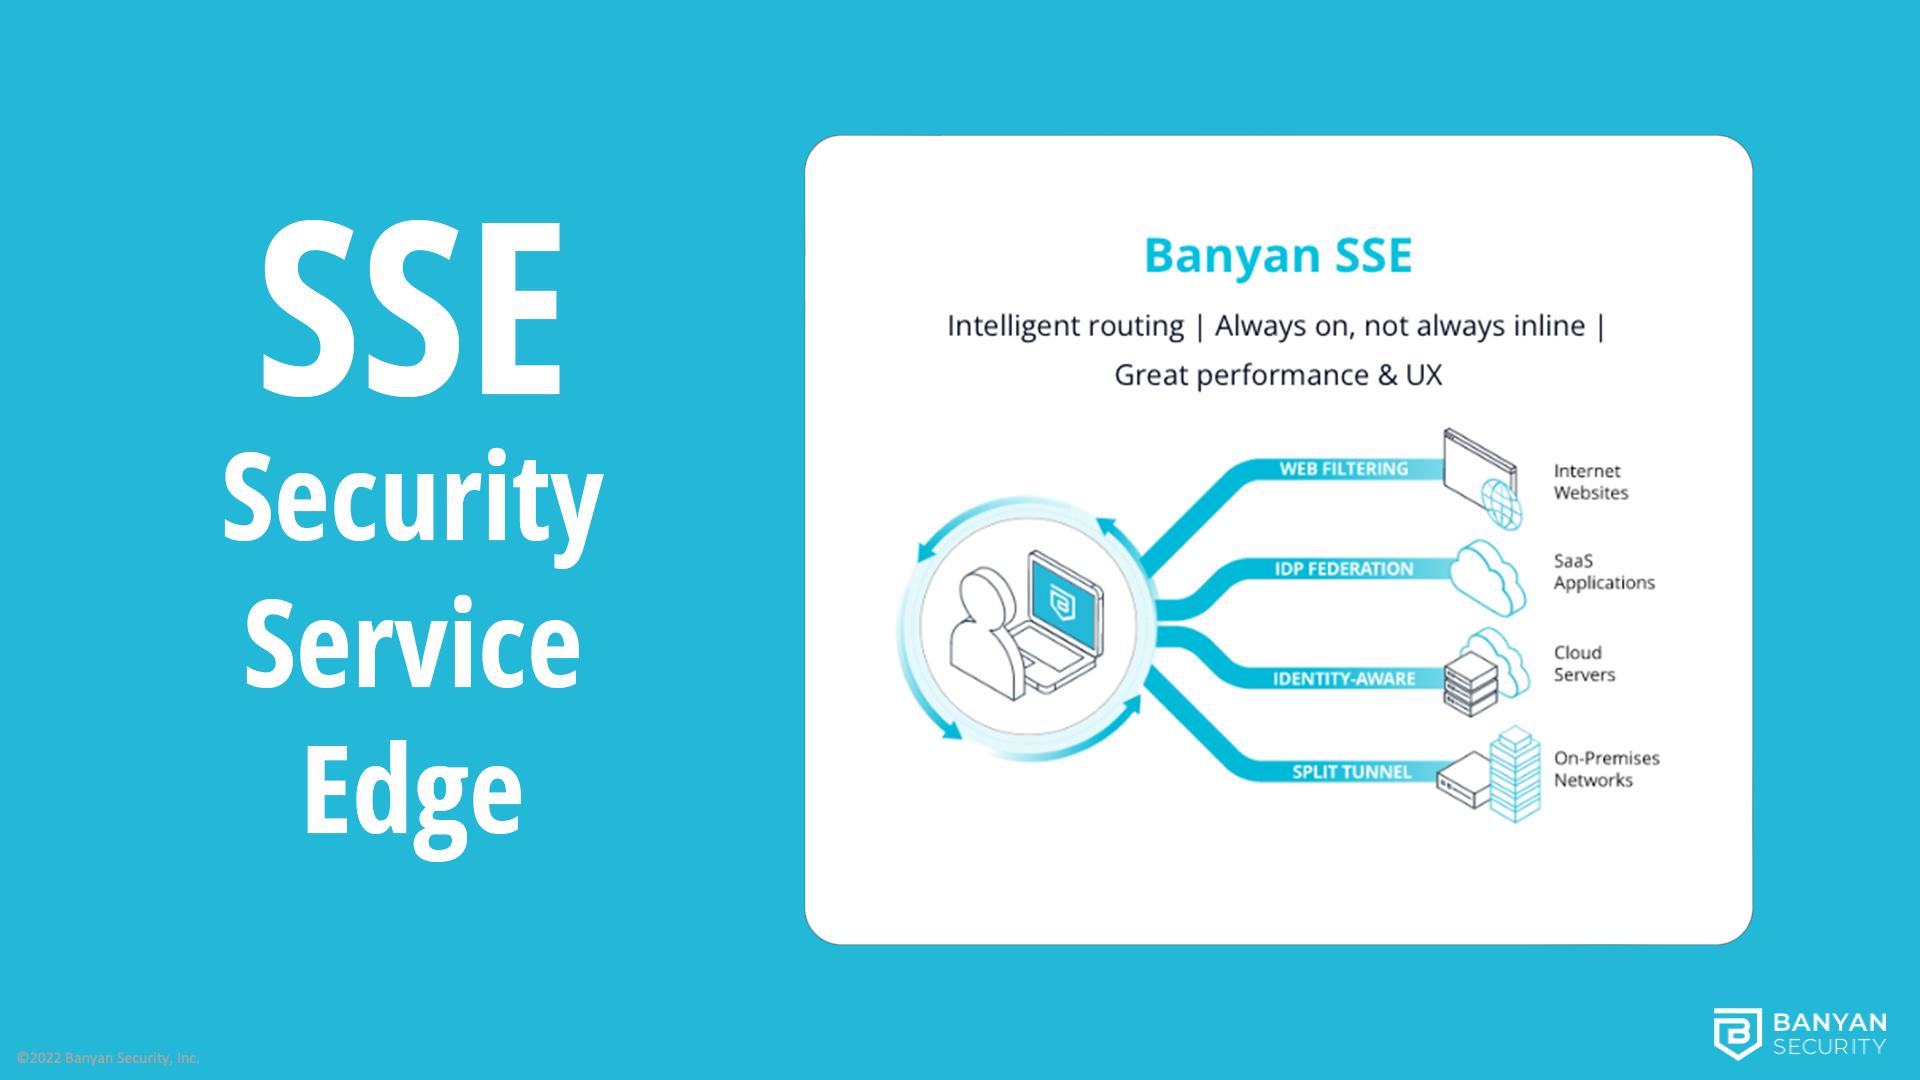 Security Service Edge (SSE) improves your corporate security, protects against phishing and malware, and helps ensure that your organization’s access and compliance policies are being enforced.